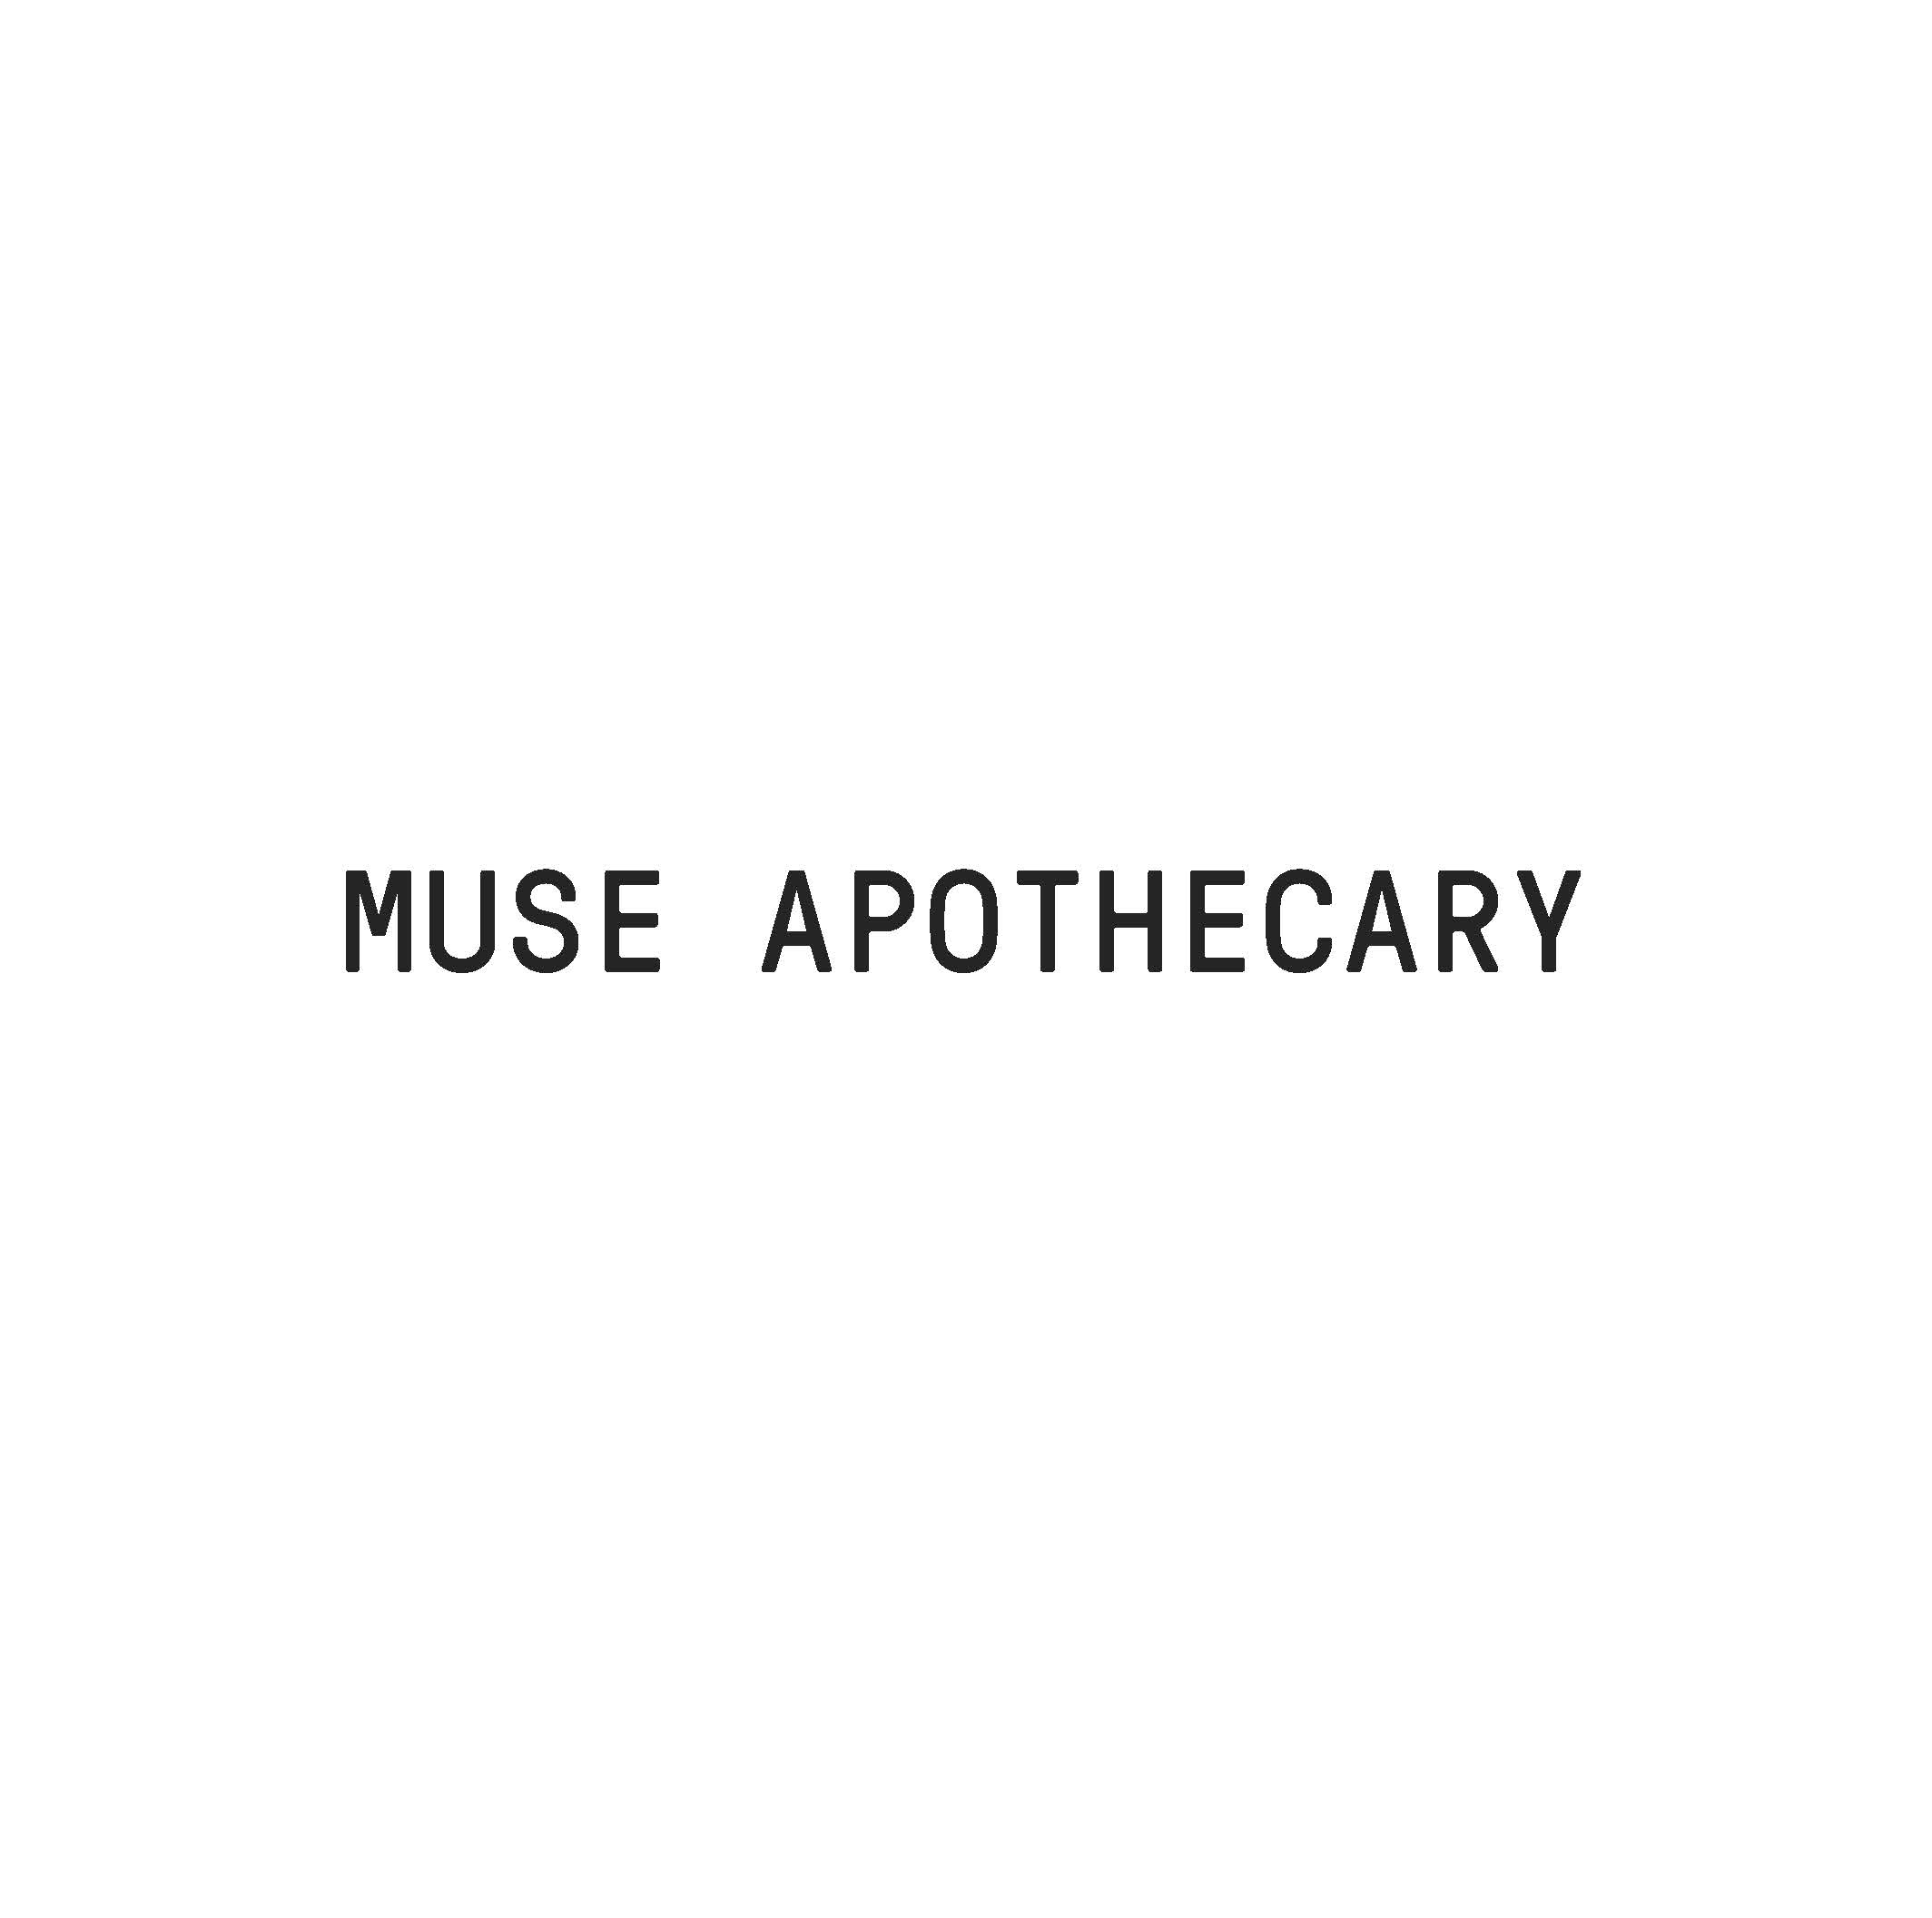 Muse Apothecary